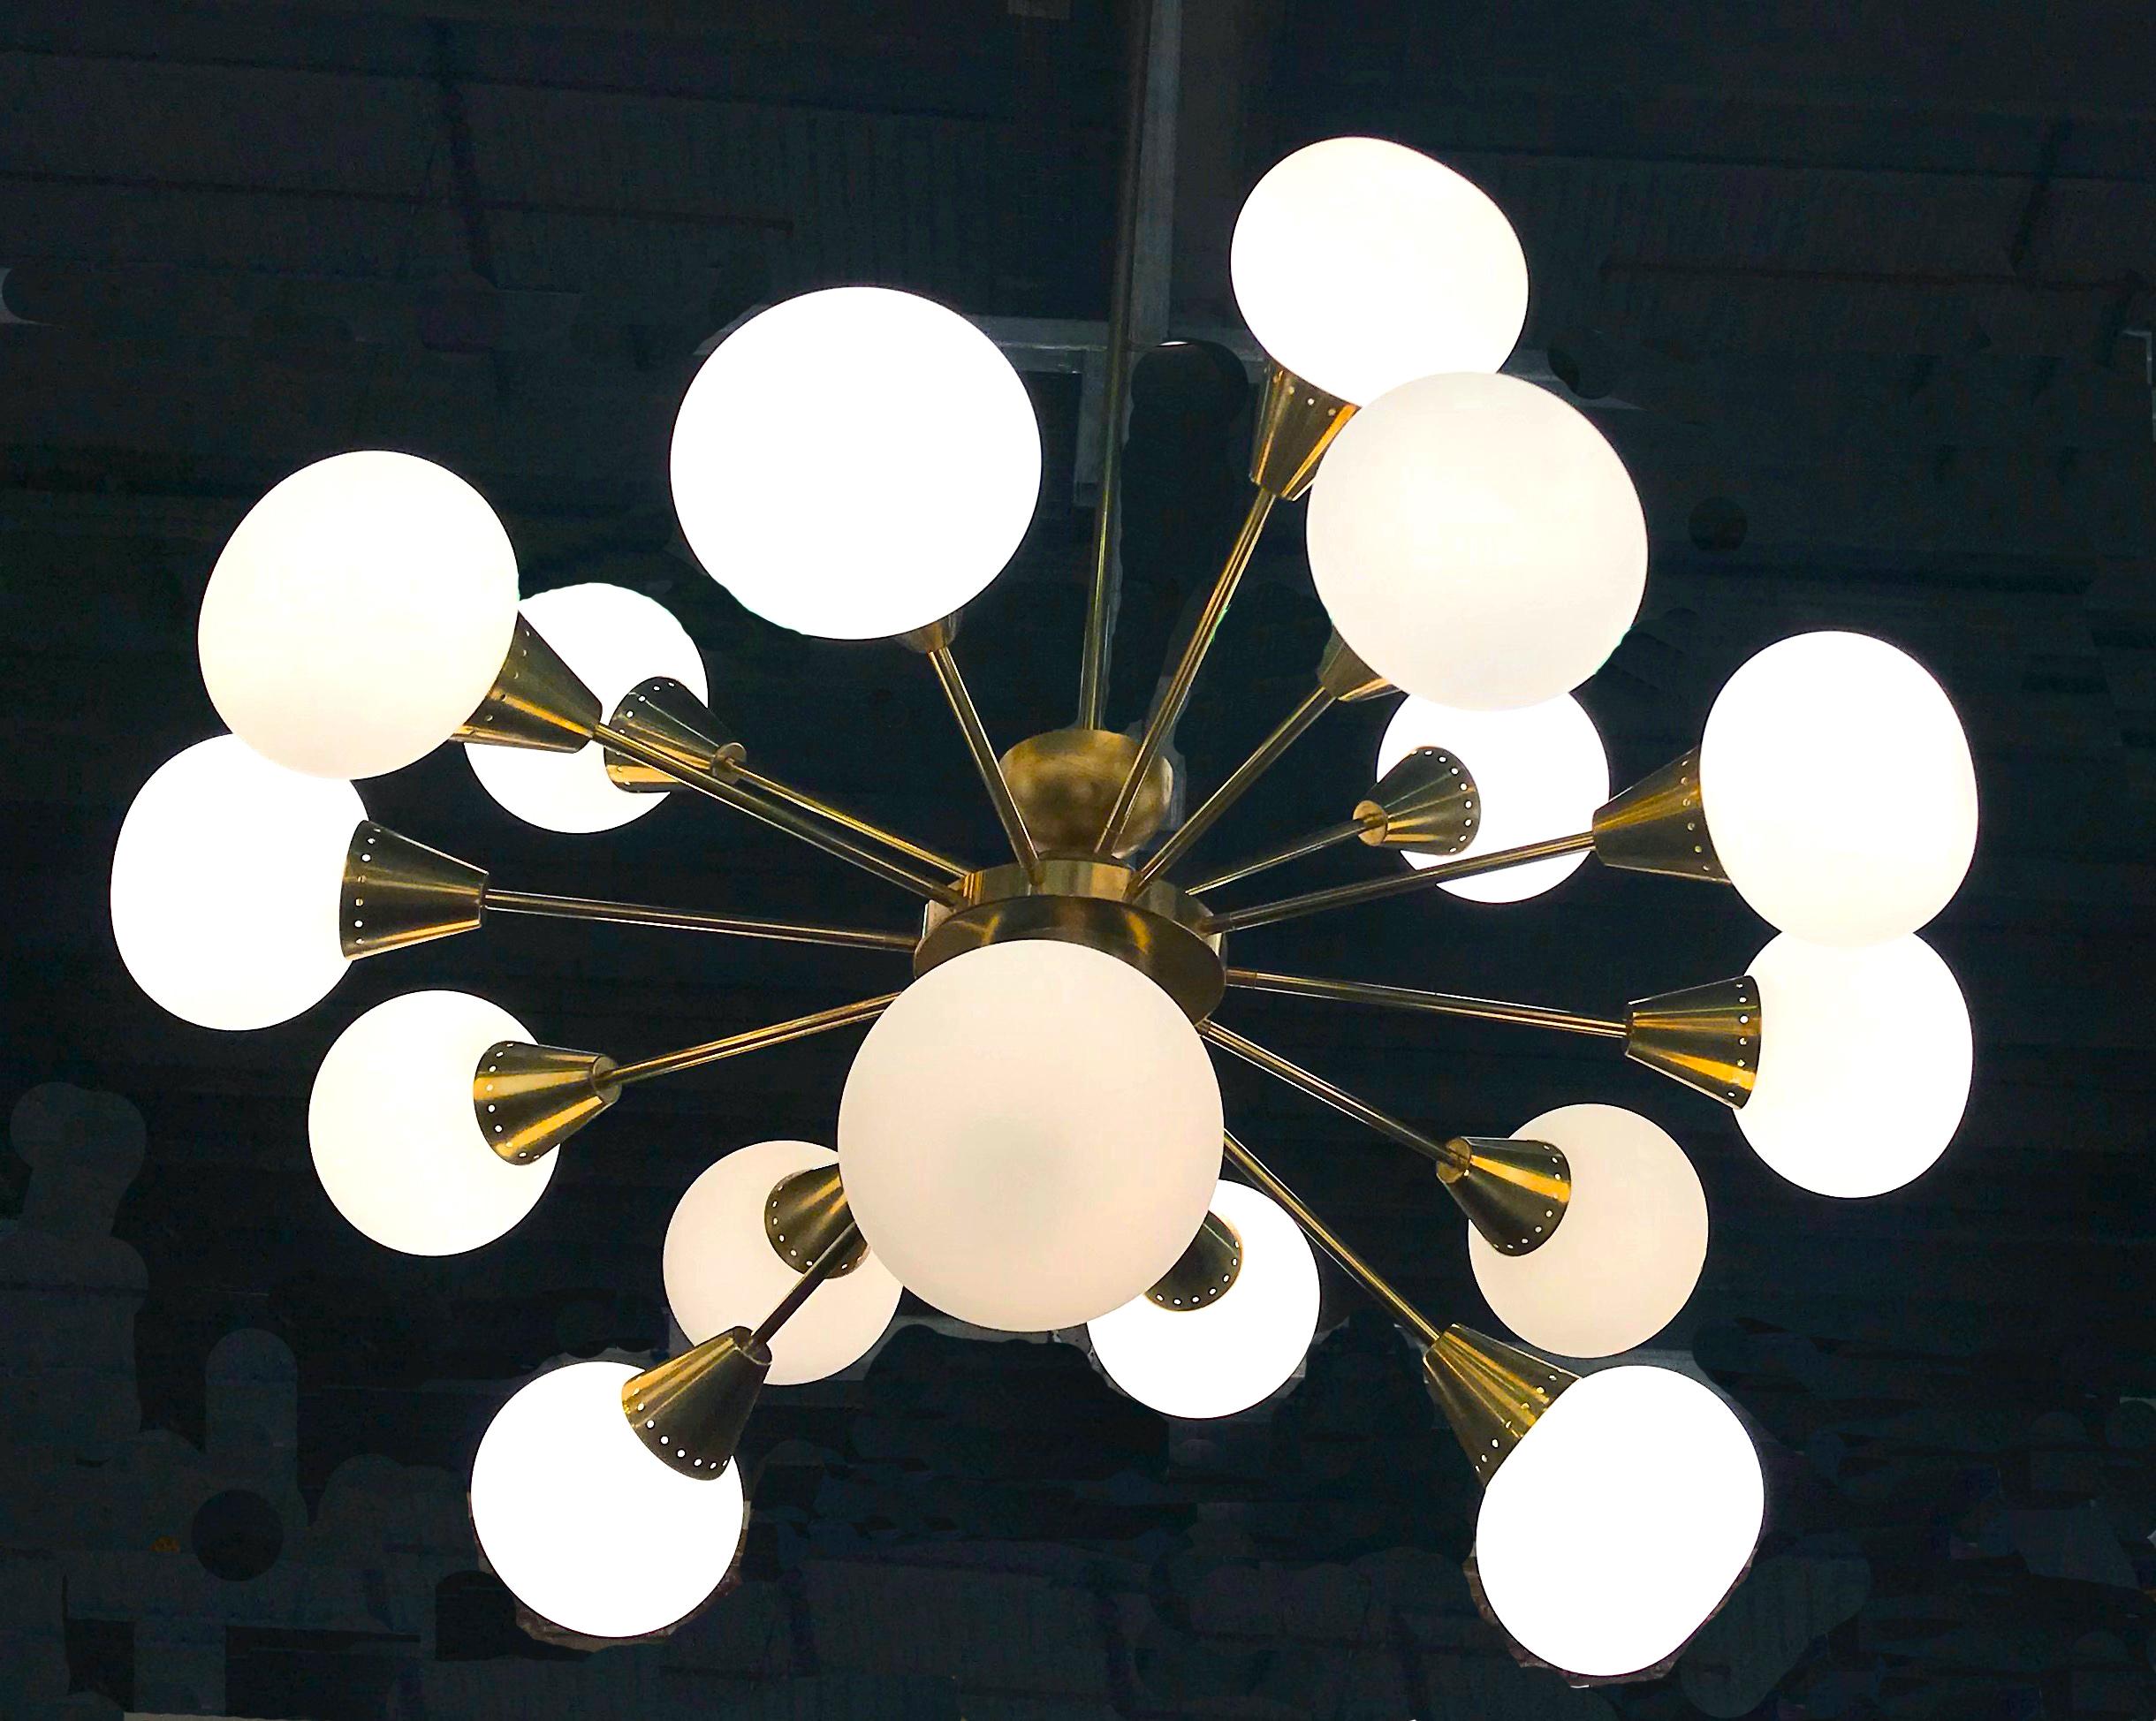 Extraordinary Italian midcentury brass and 16 opaline sphere Murano glass large Sputnik chandelier.
Available also a pair. The brass height is customizable.
16 E27 light bulbs.
This light fixture can be disassembled and the glasses individually